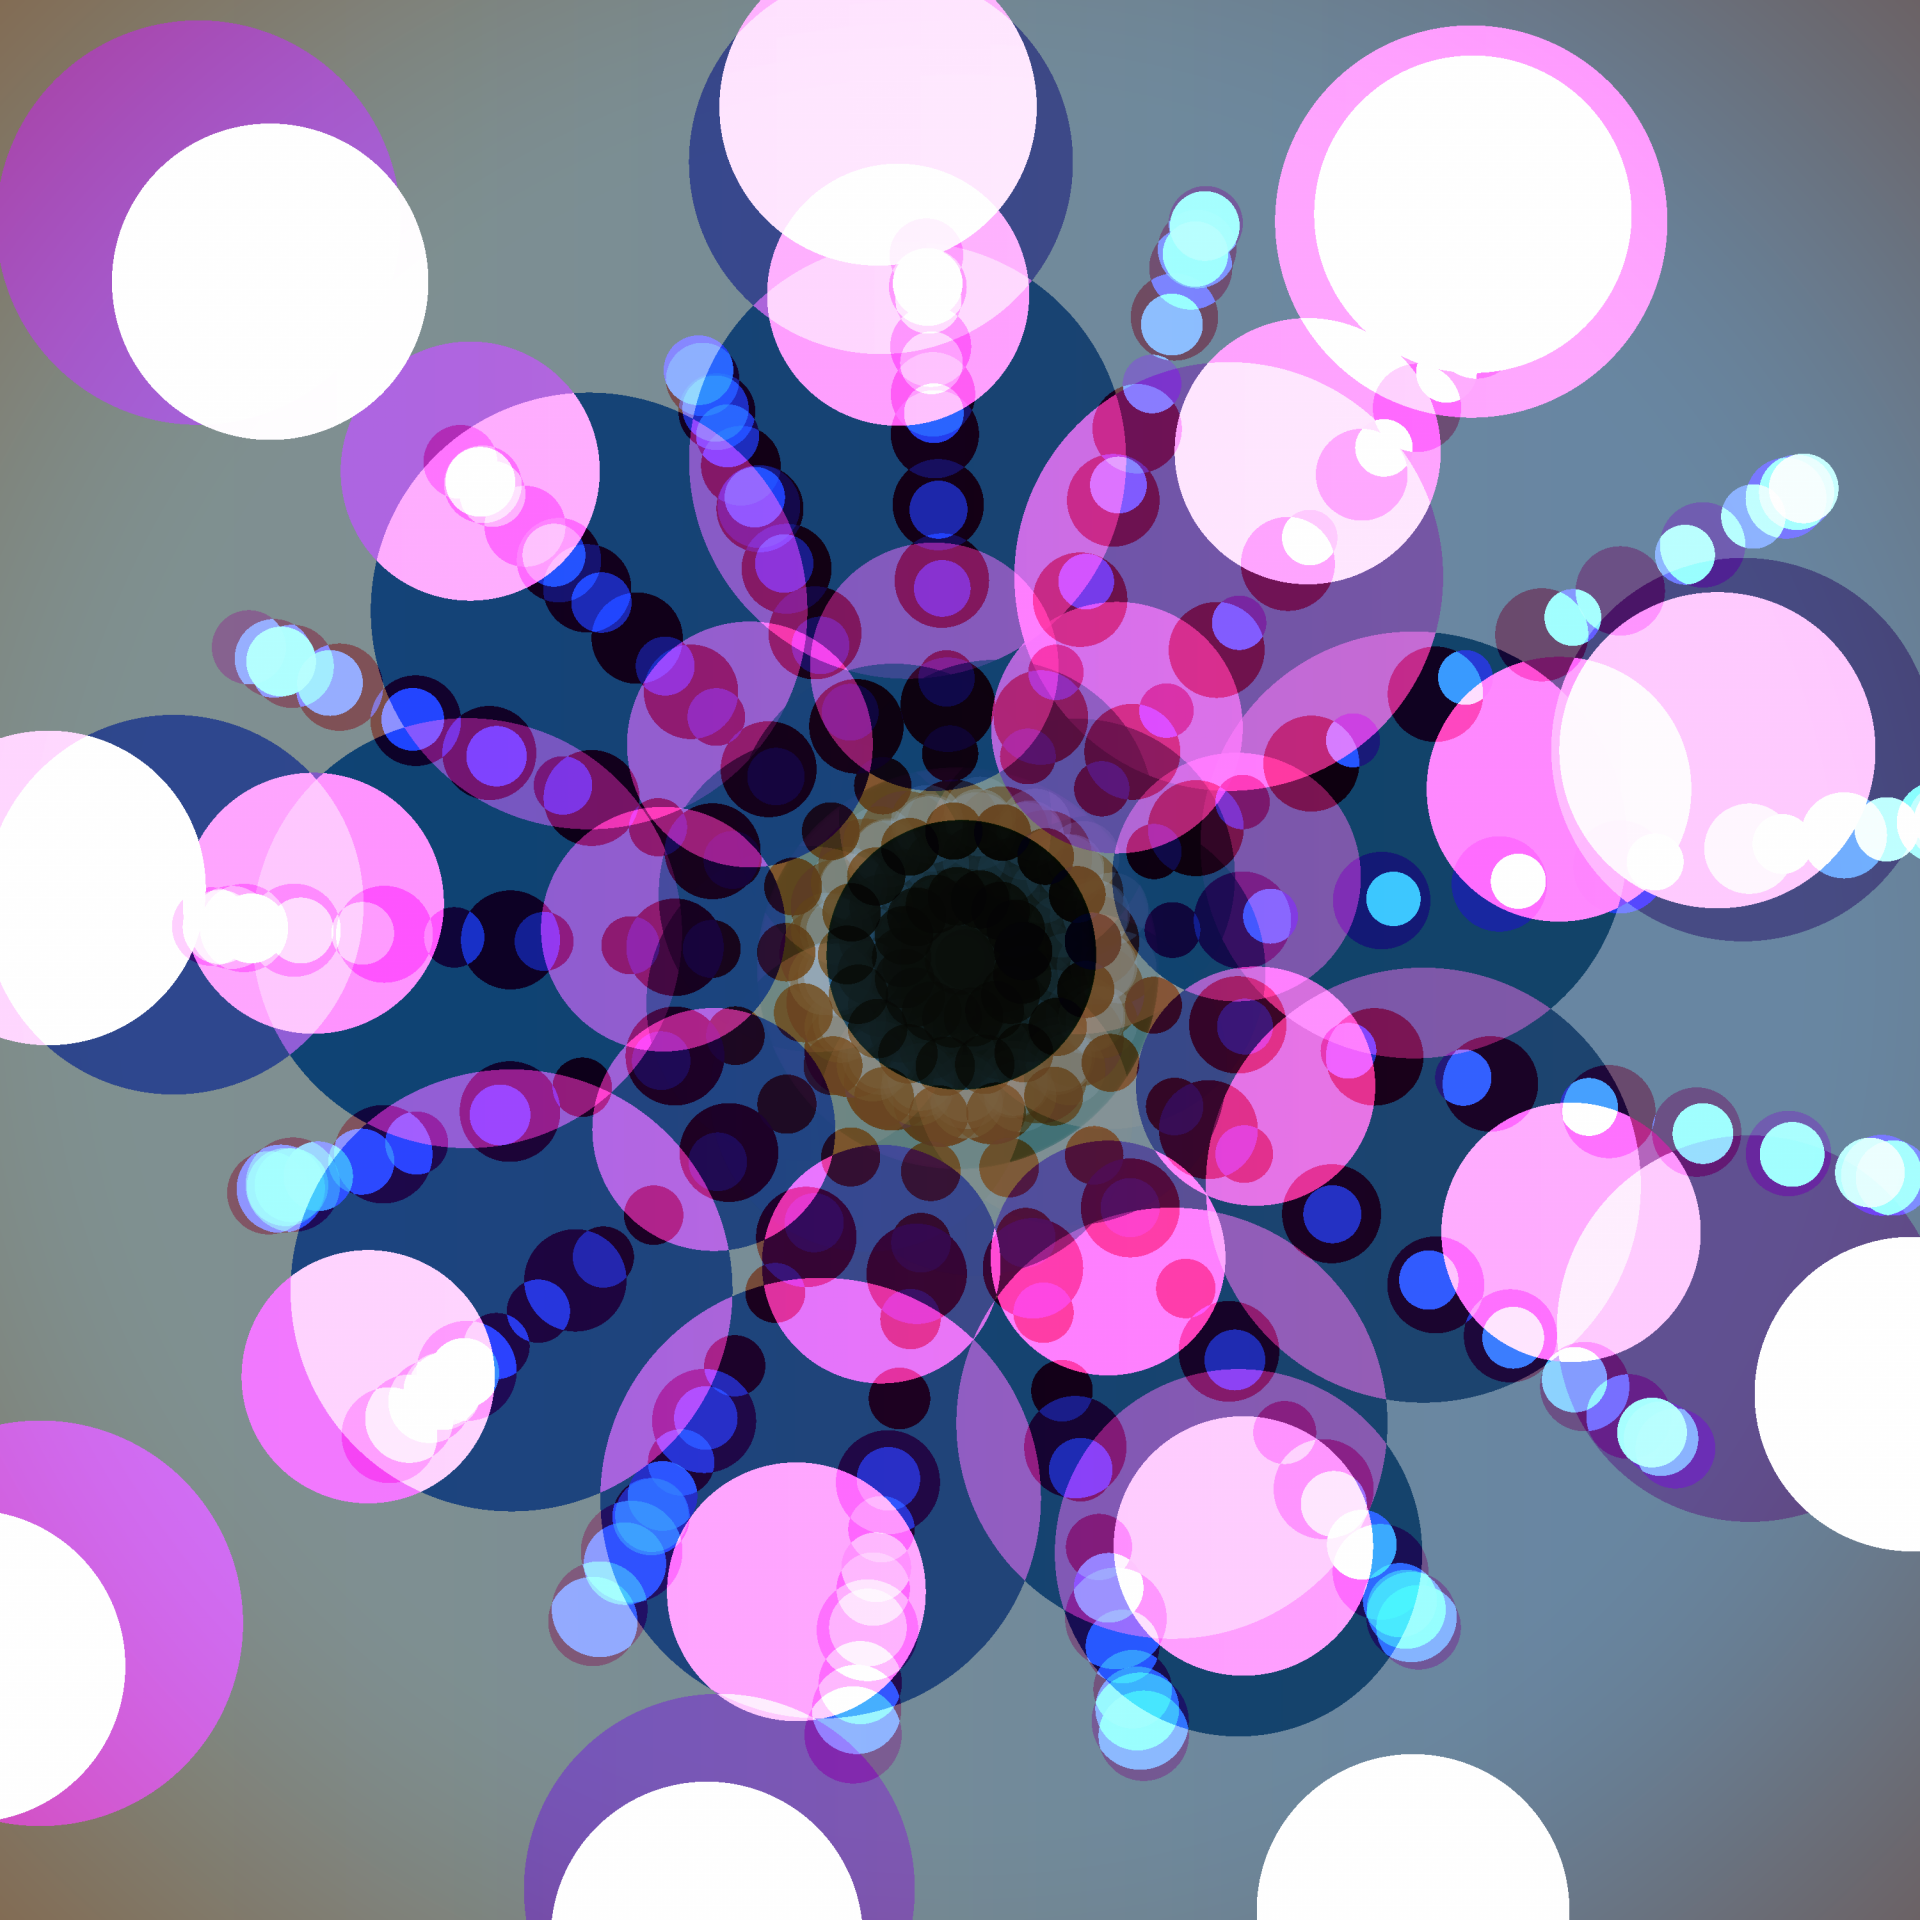 Circles of white, purple, pink, and dark blue form a pattern of radial lines around a central black hole